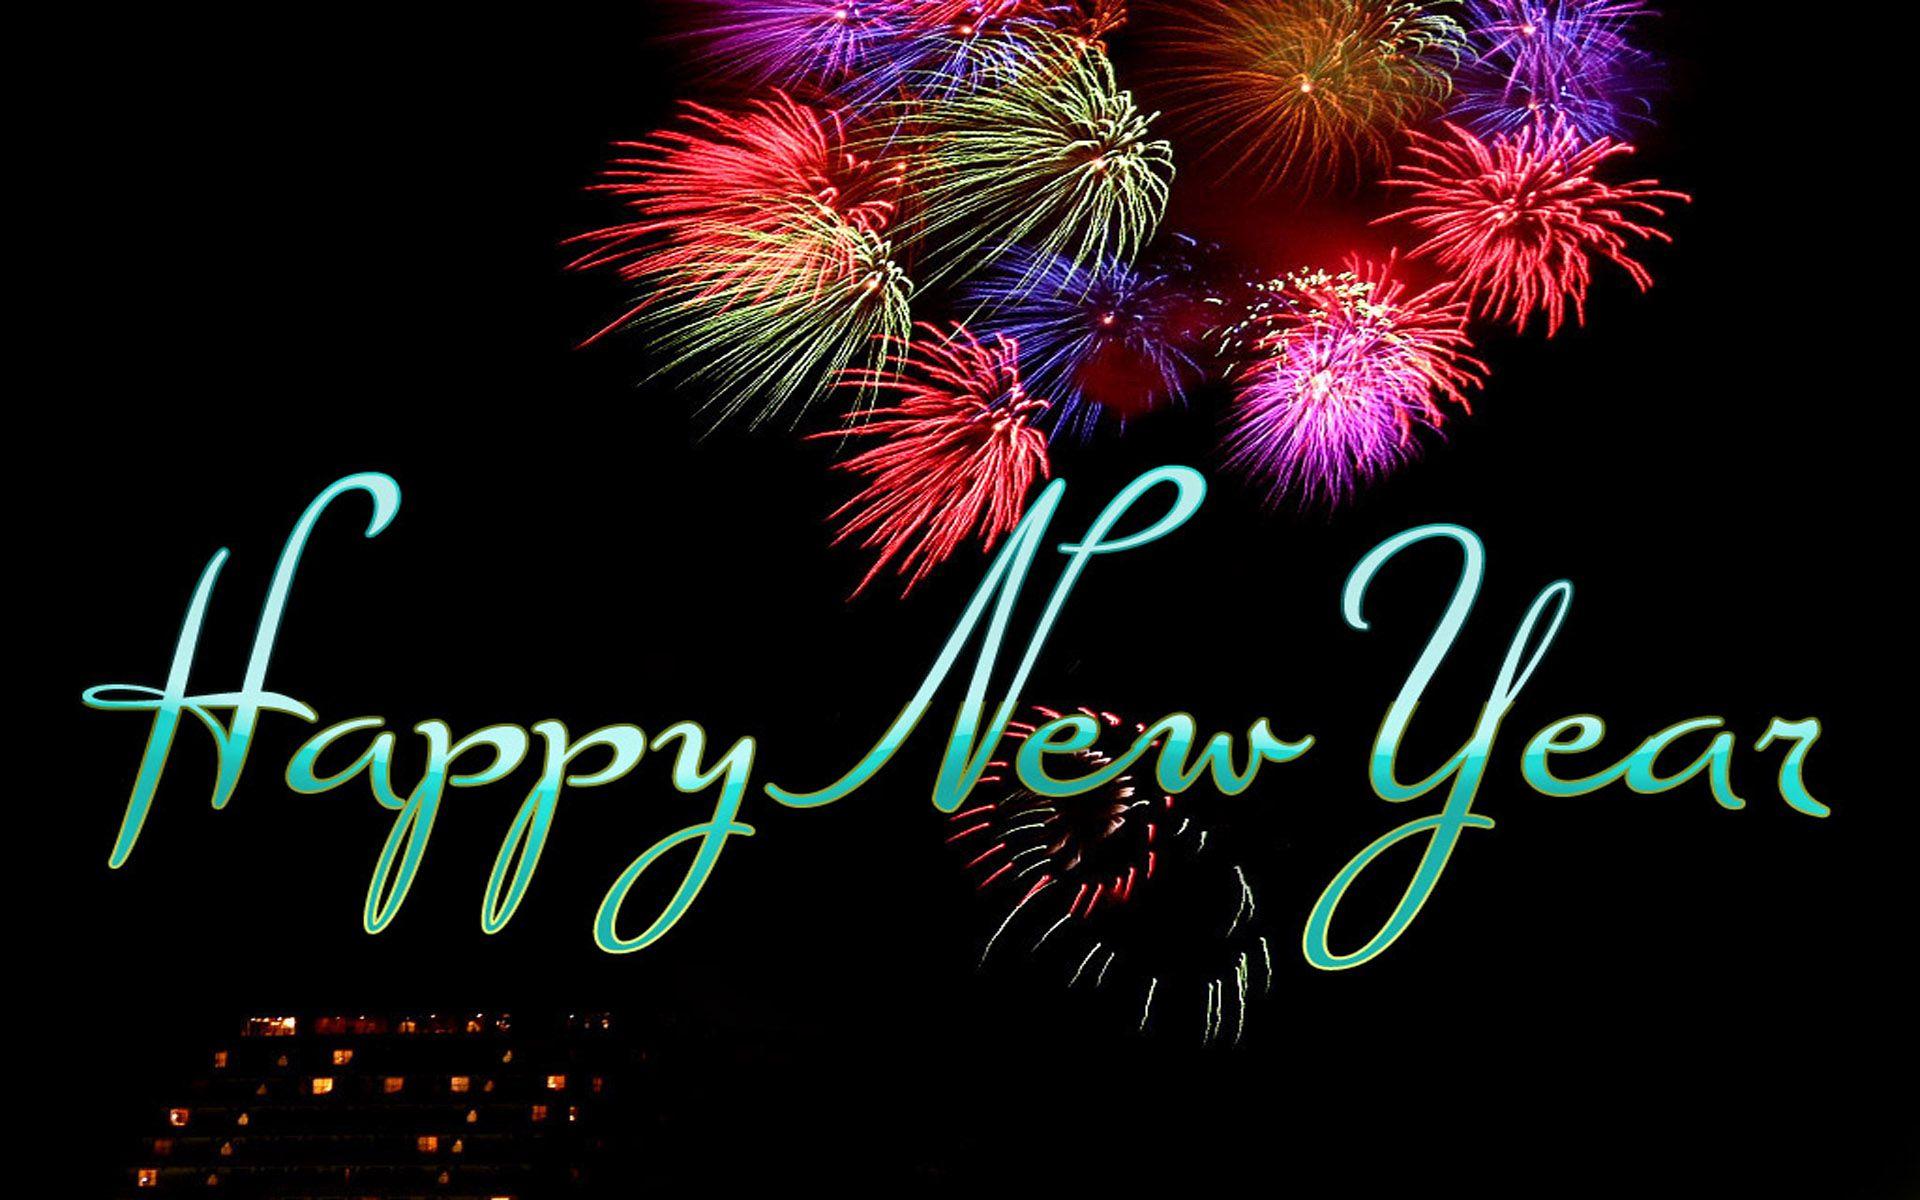 Happy New Year 2020: New Year Images, Wallpapers, Greeting Cards and  Pictures for Whatsapp & Facebook | PINKVILLA